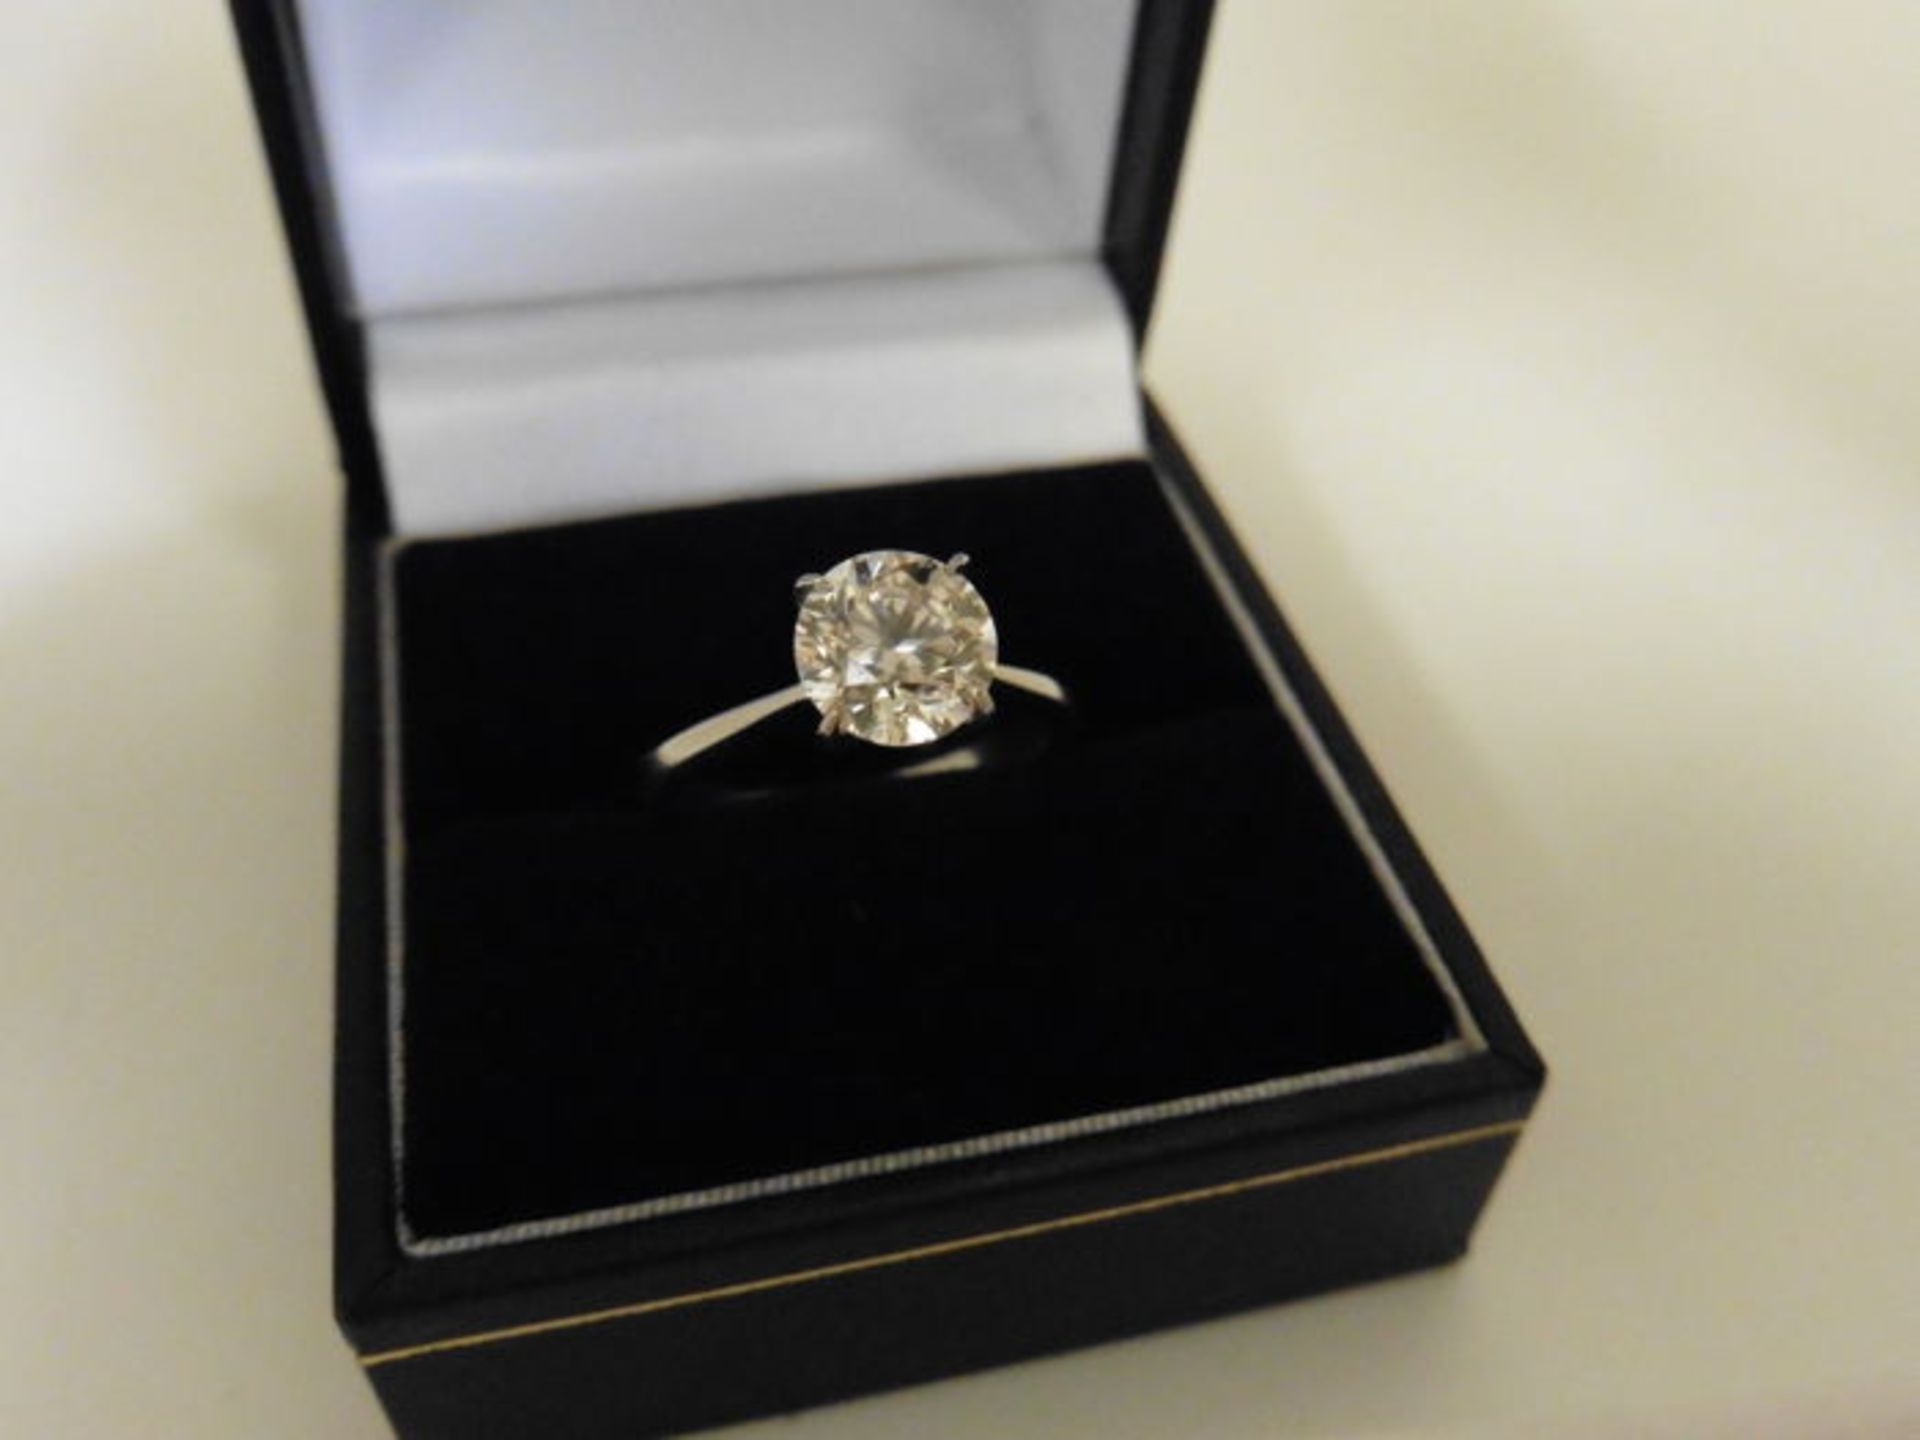 1.52ct diamond solitaire ring set in platinum. WGI certification - 9624102572. K colour and SI1